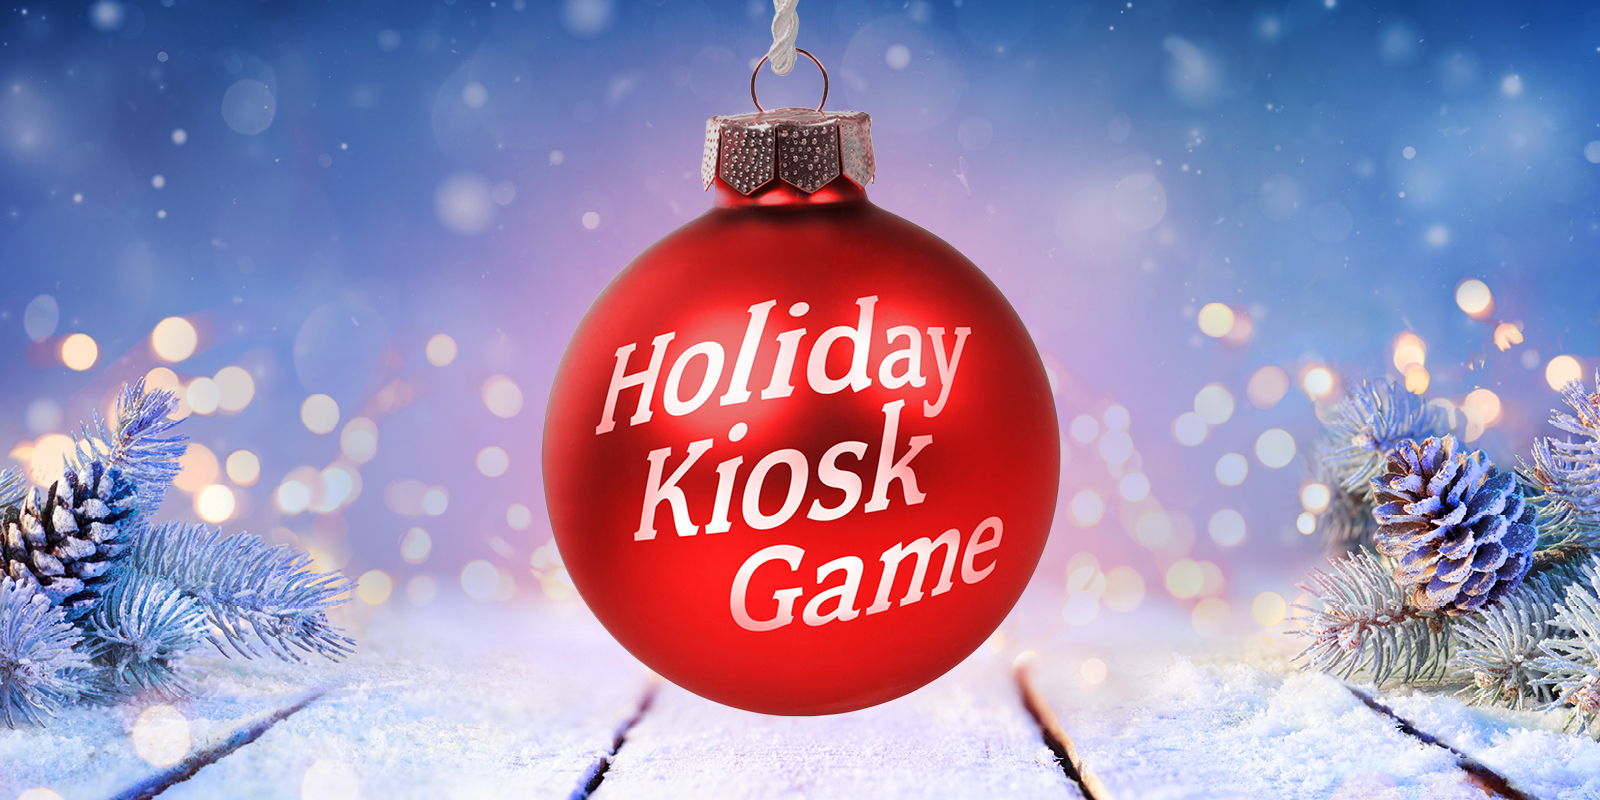 red christmas ornament with holiday kiosk game sign